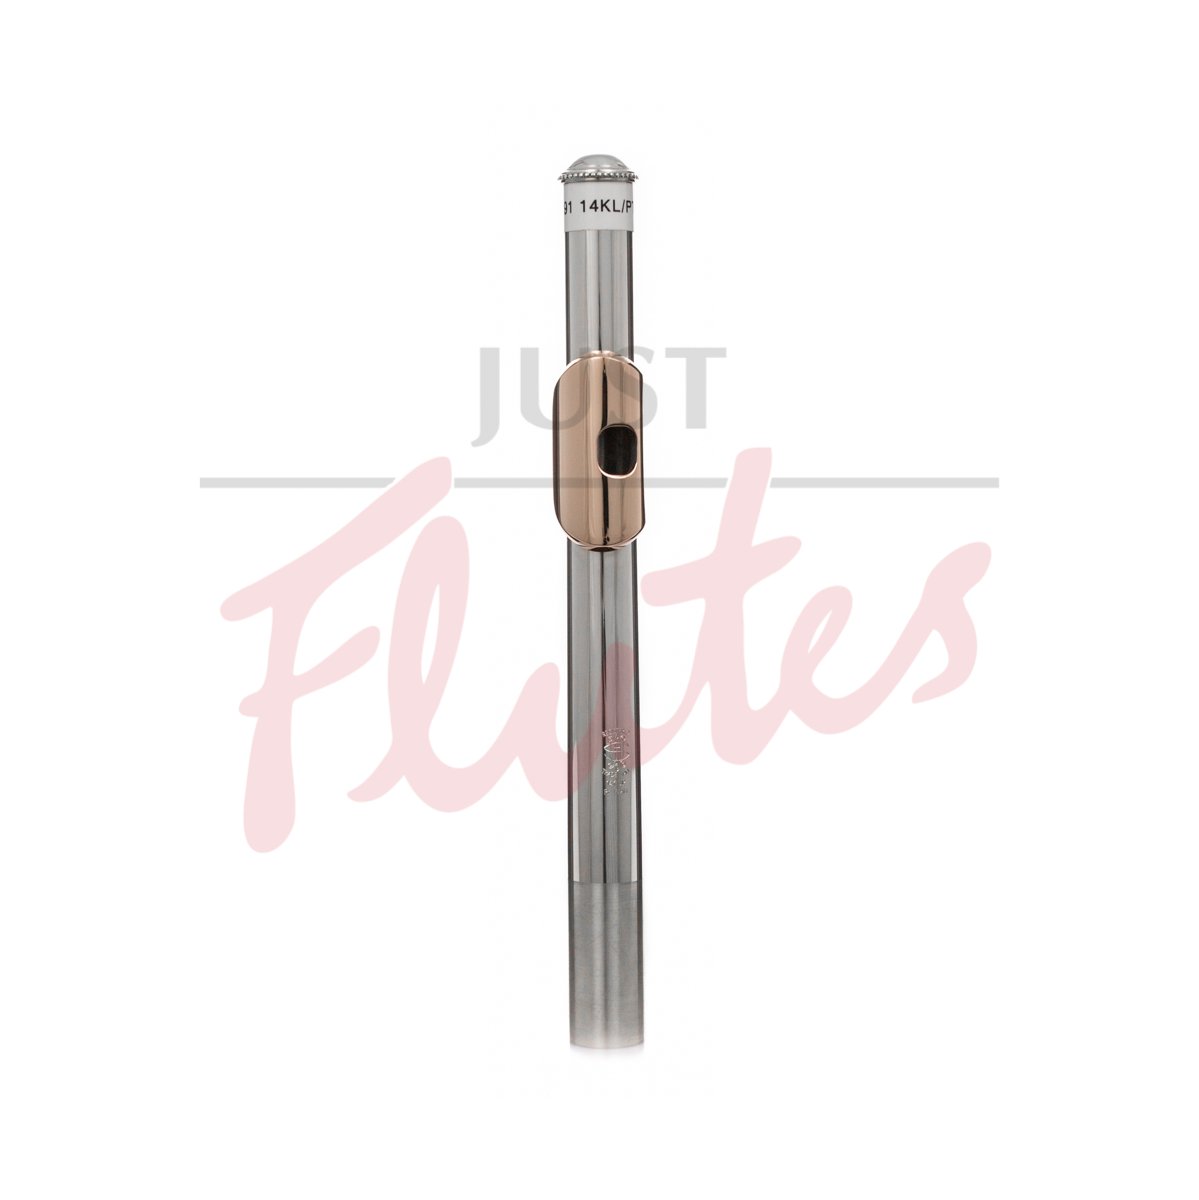 Haynes Solid Flute Headjoint with 14k Rose Lip and Pt Riser, P Cut